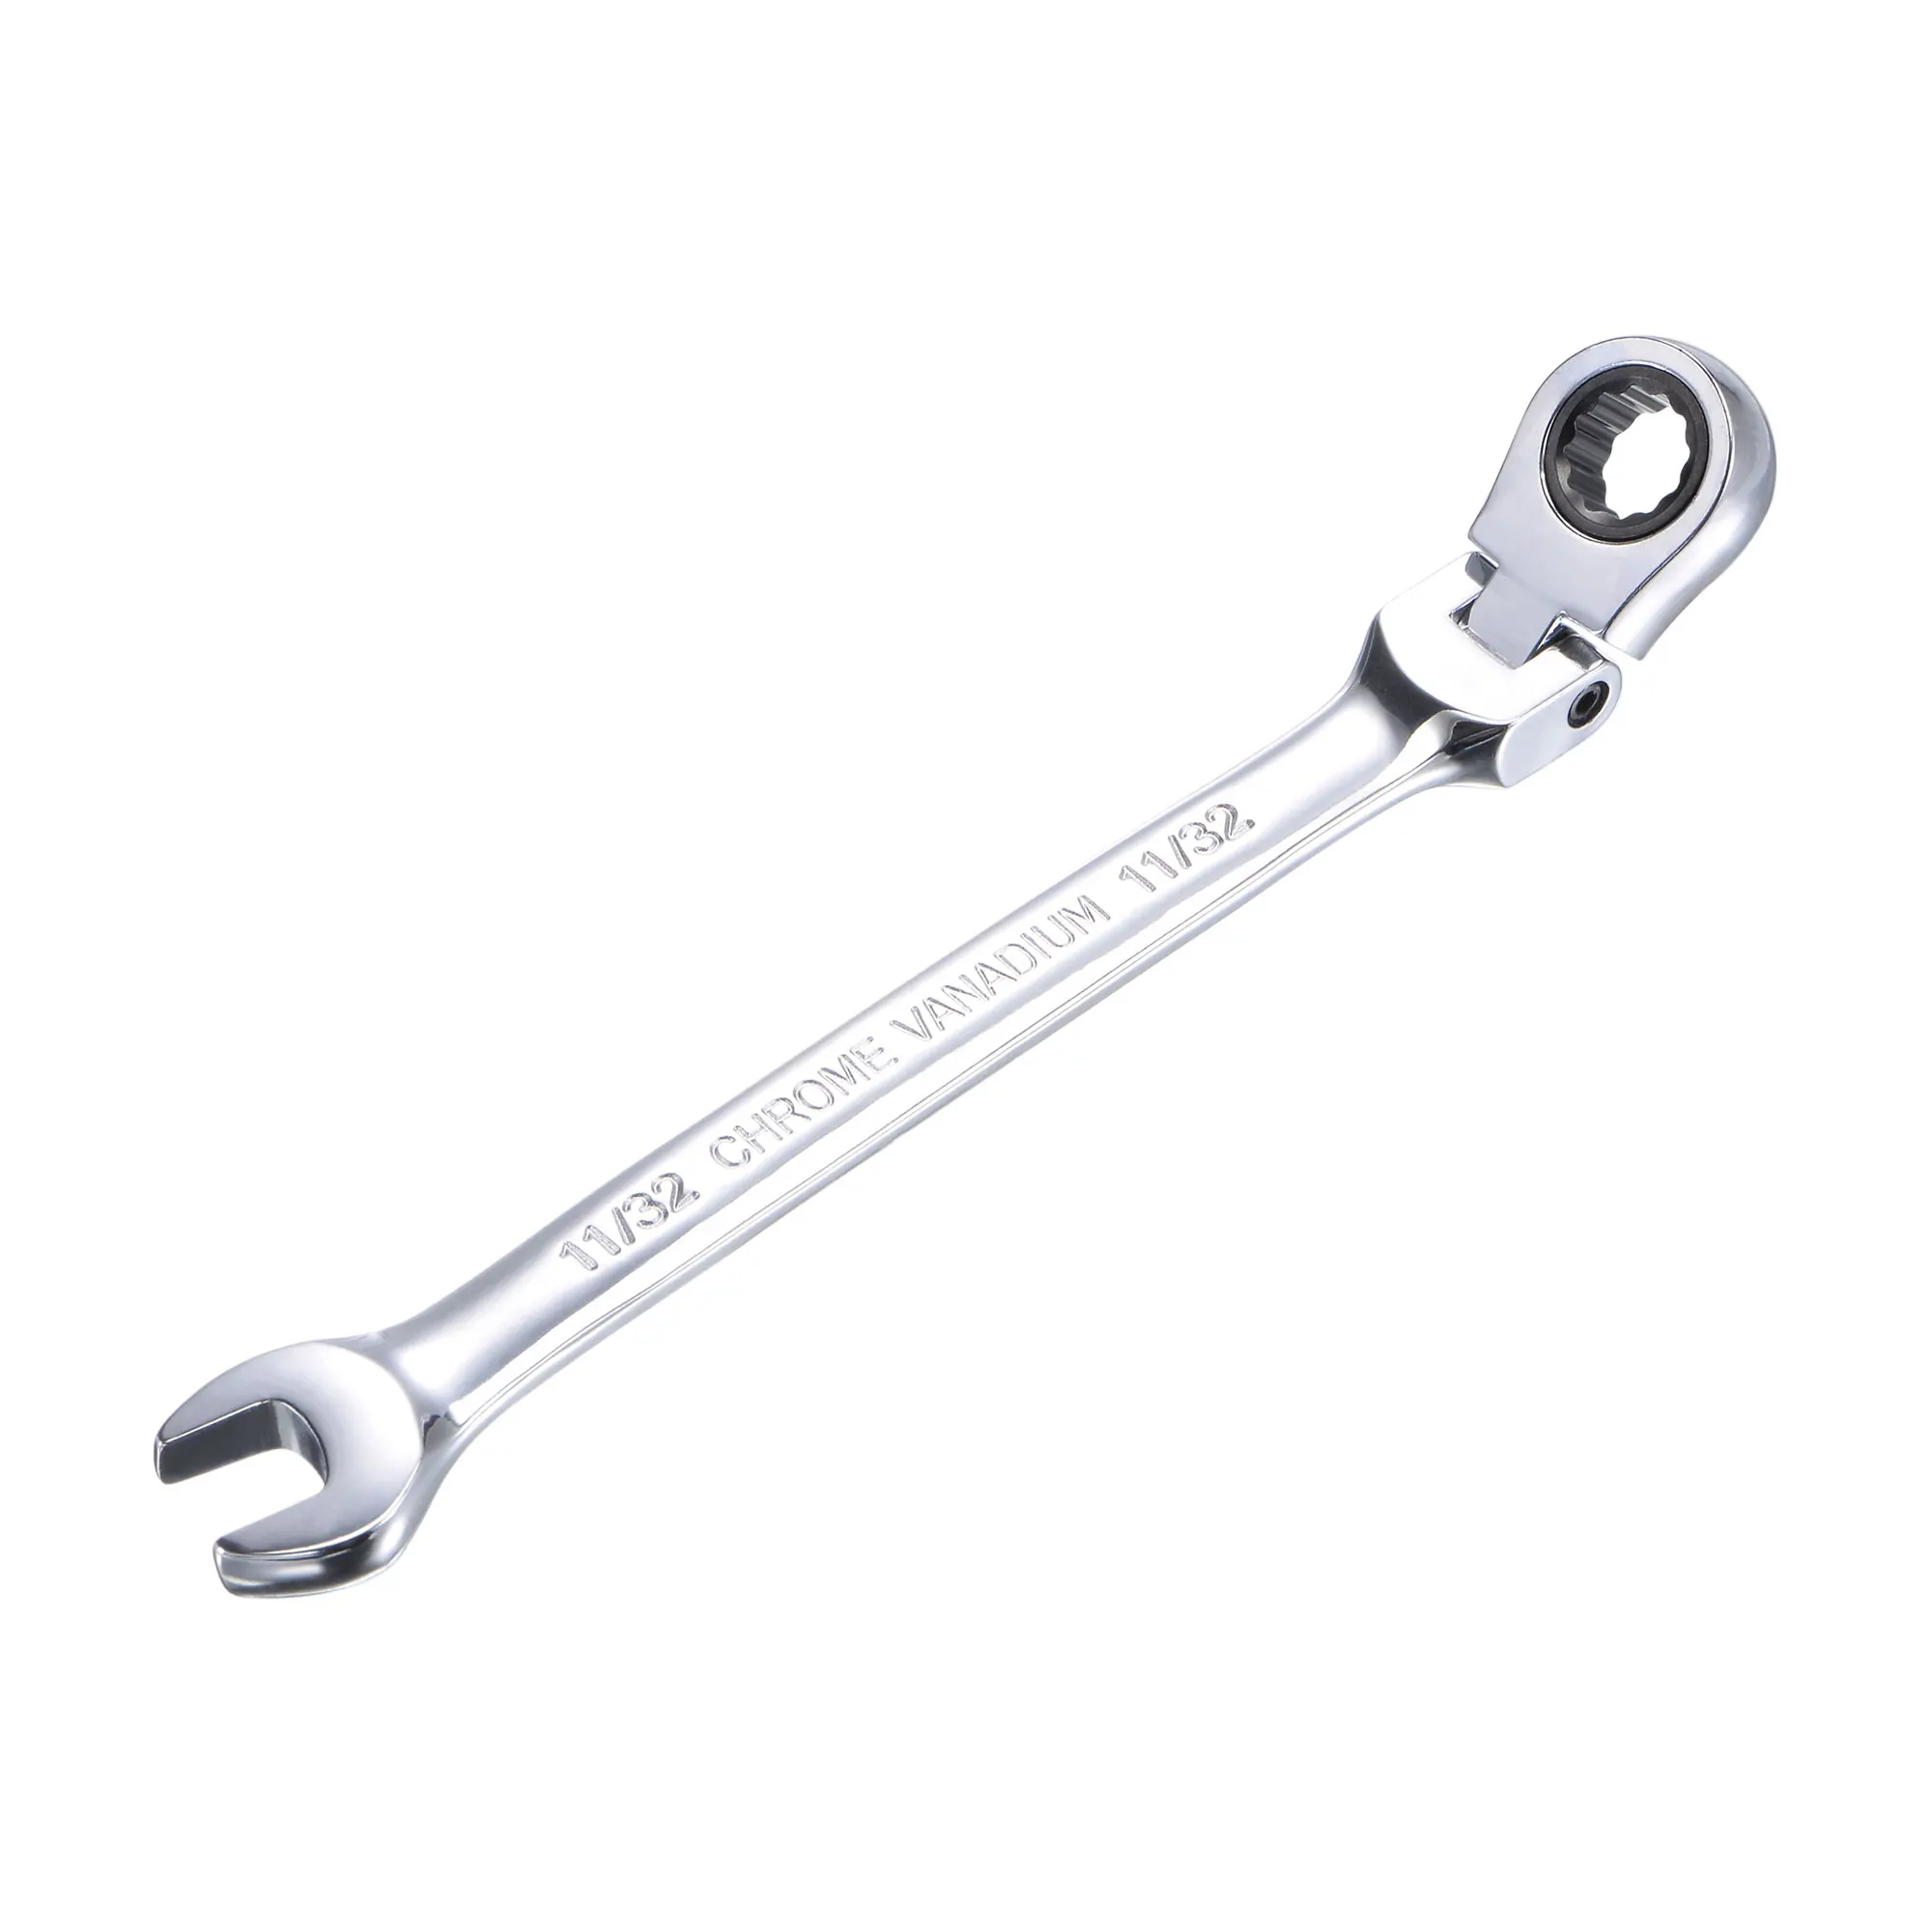 

11/32Inch Flex-Head Ratcheting Combination Wrench 72Teeth 12Point Ratchet Box Ended Spanner CR-V Ratchet Wrench Repair Hand Tool